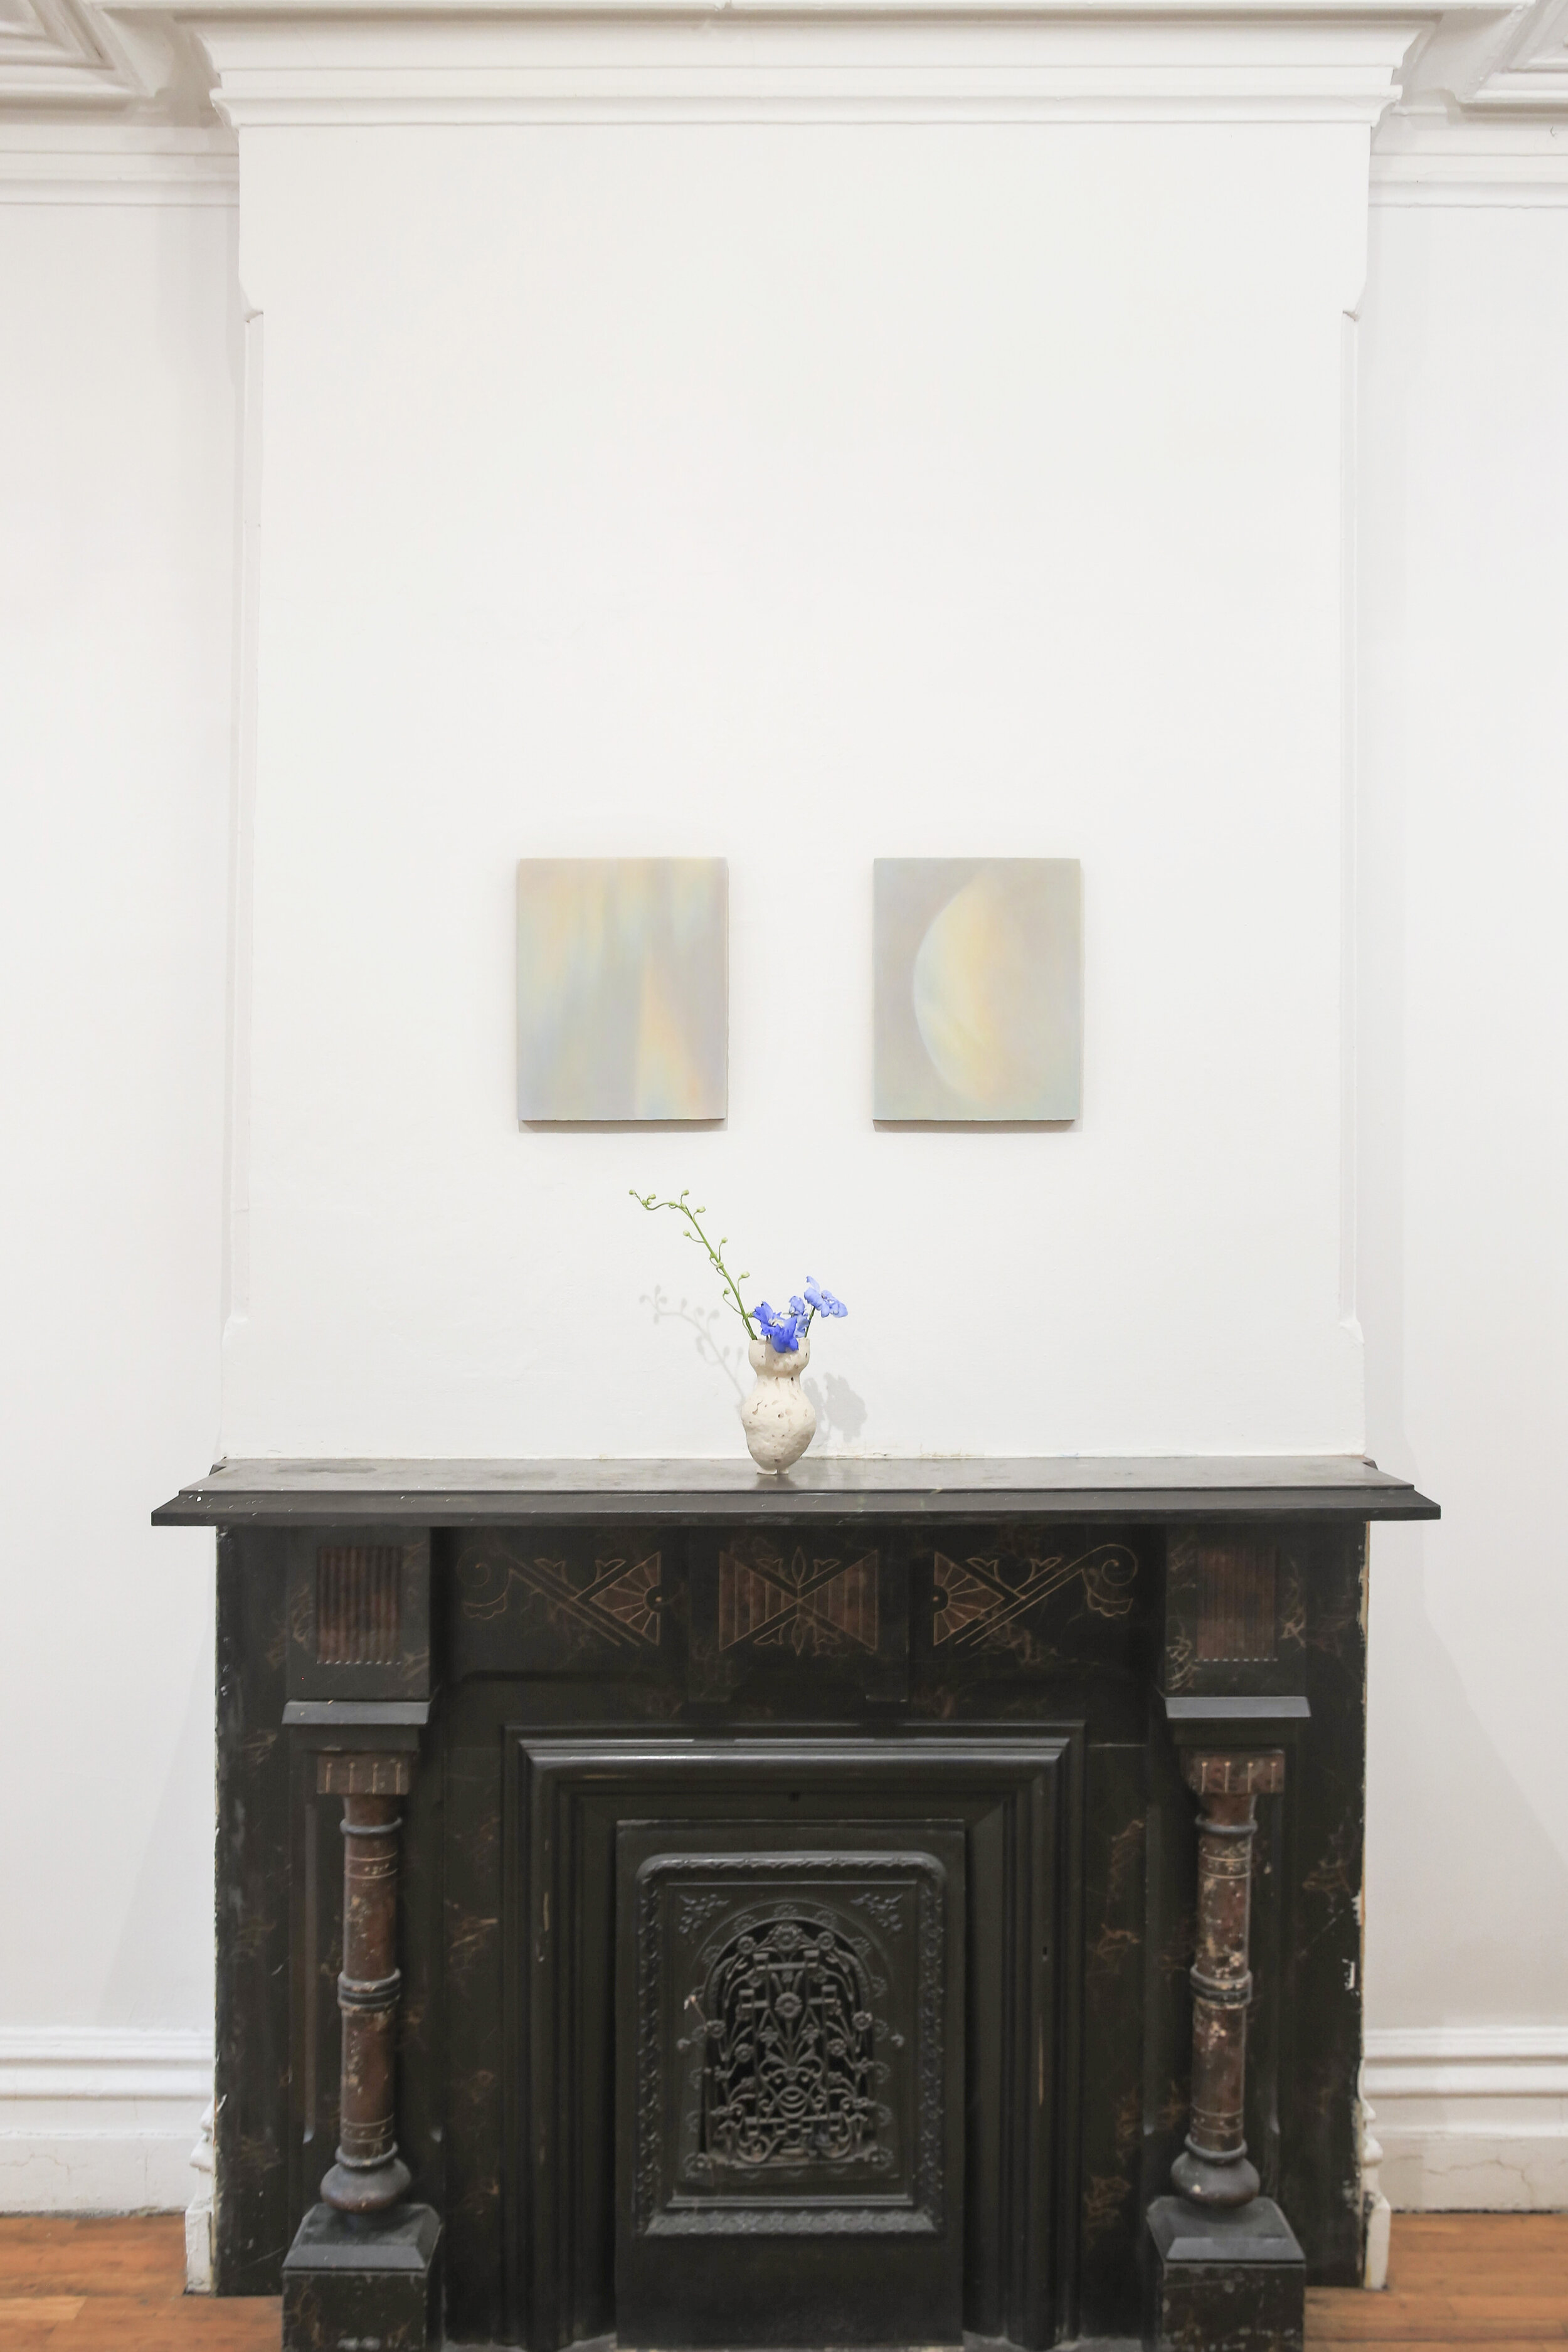   Shuling Guo: 5—6 pm  installation view. Photography by Lynn Hai ©Shuling Guo, courtesy Fou Gallery 